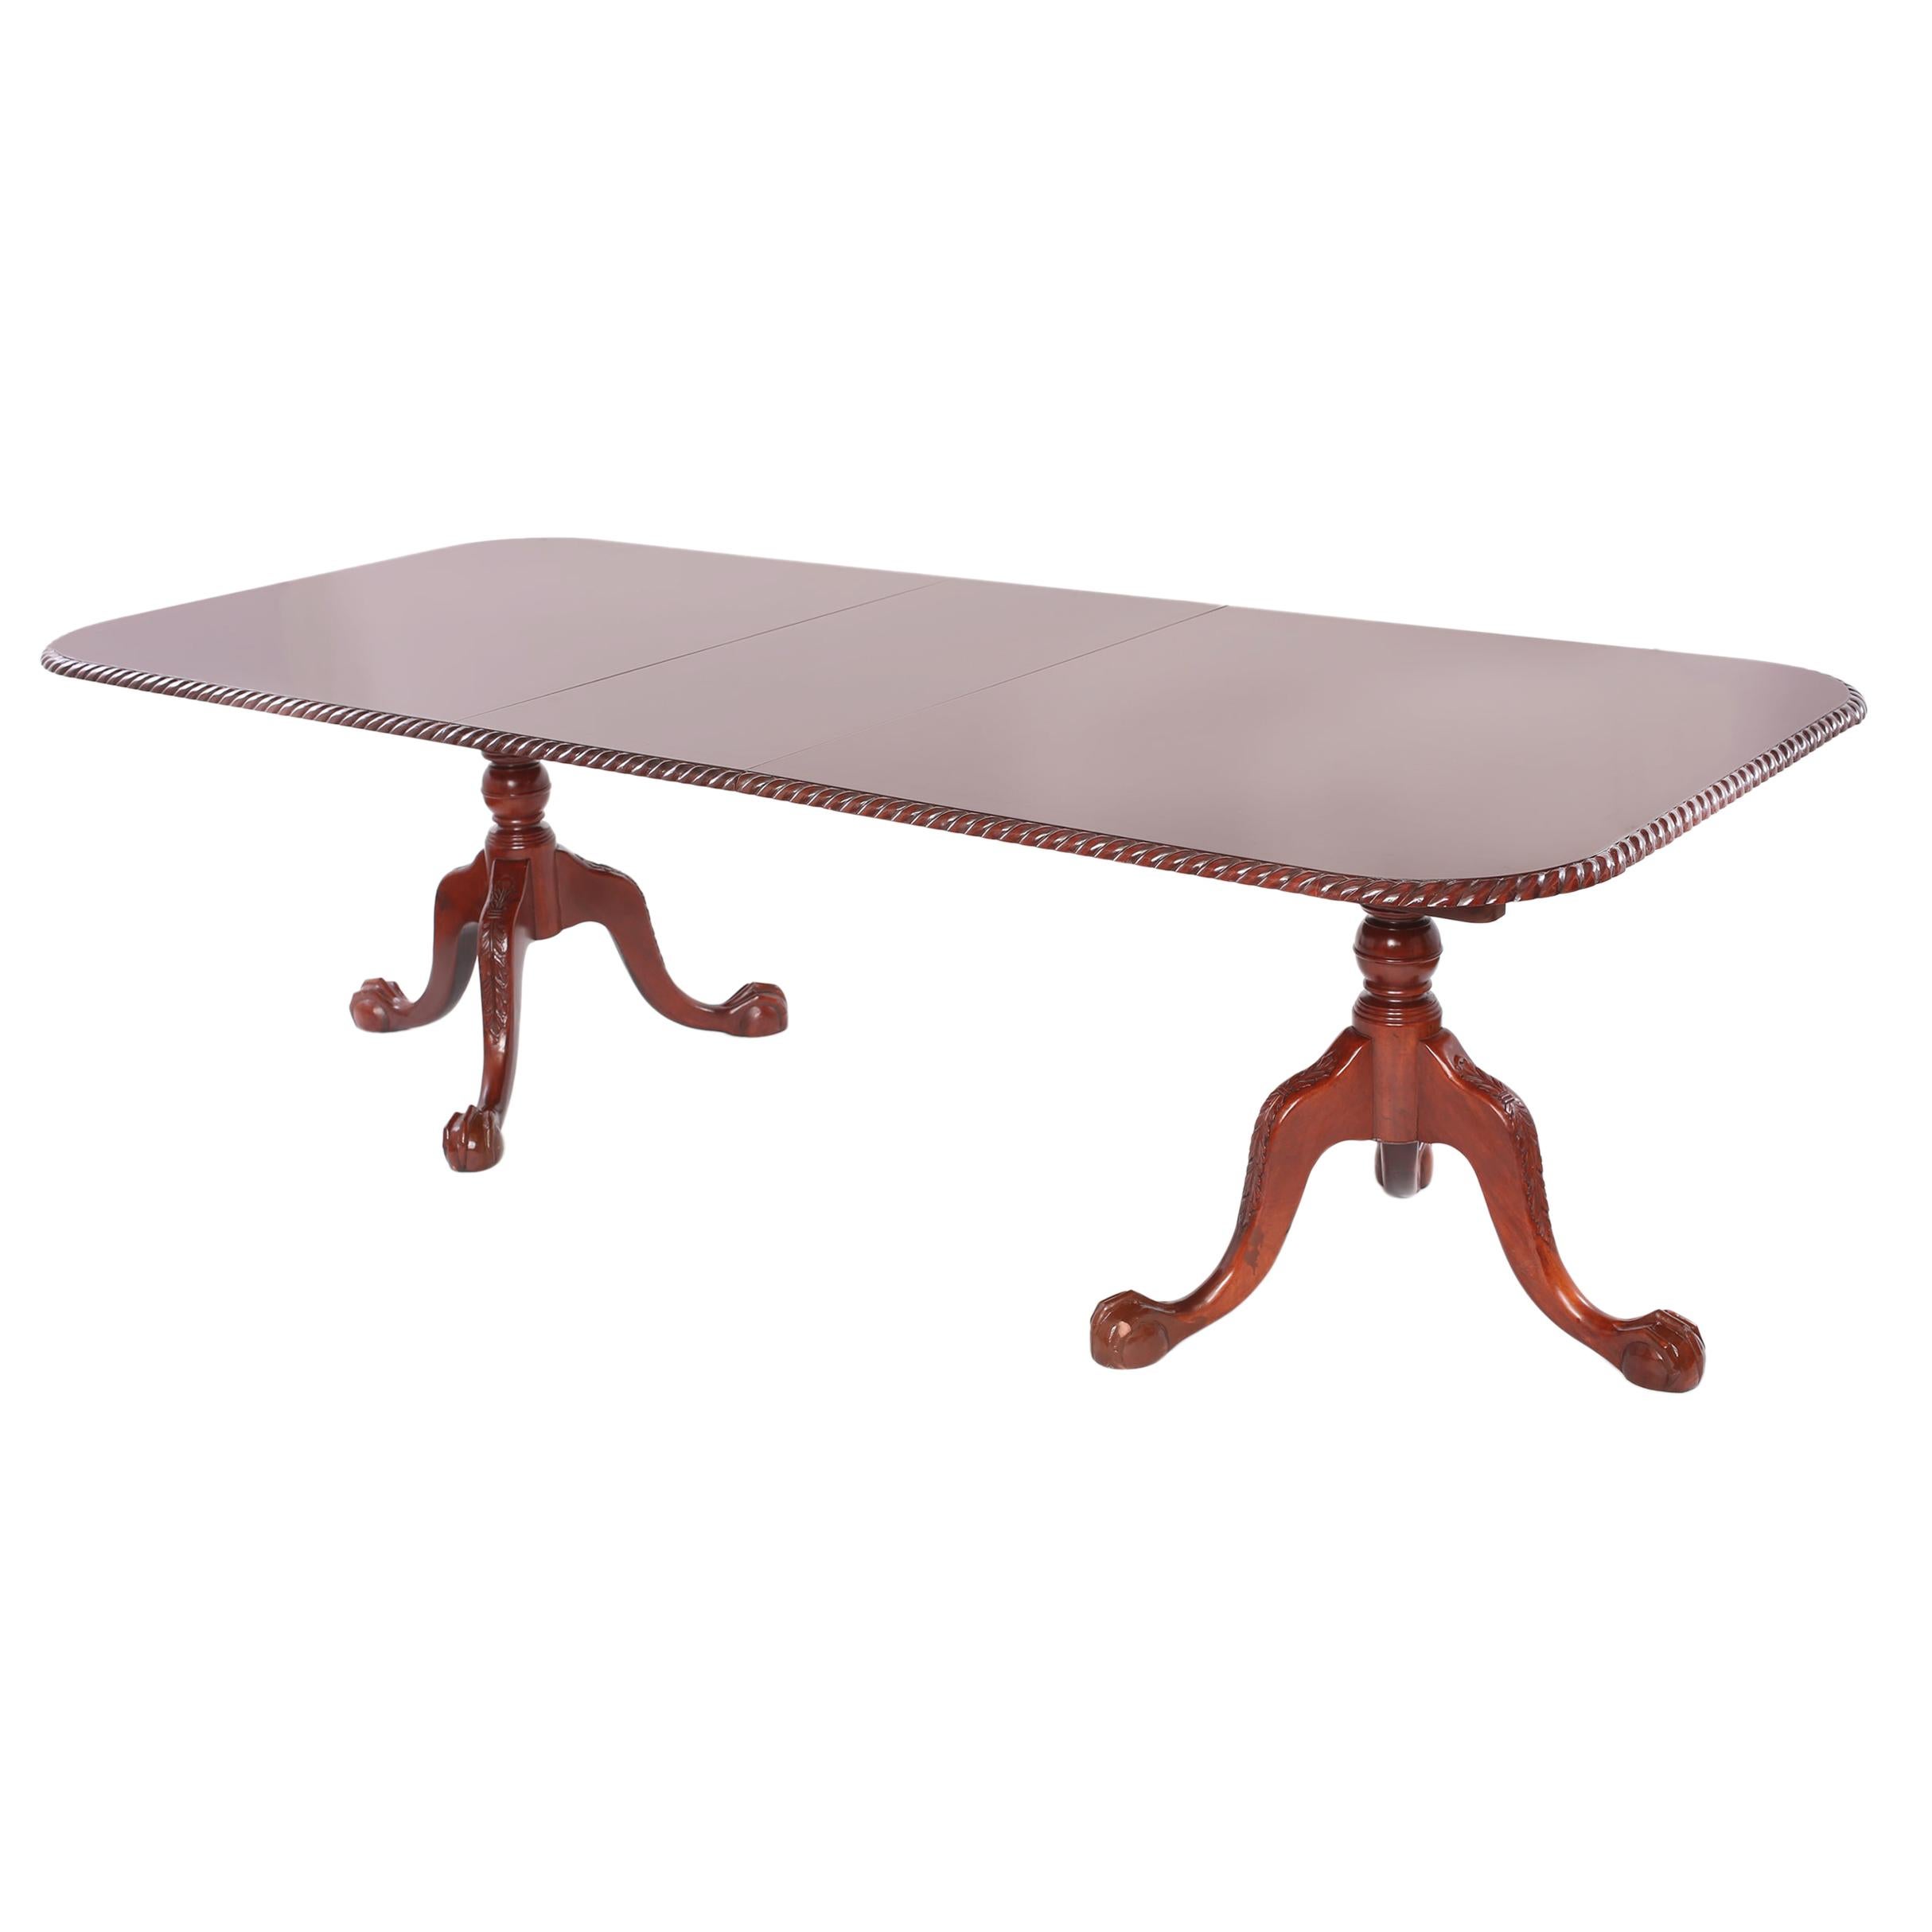 Beautifully Crafted American Centennial Dining Table